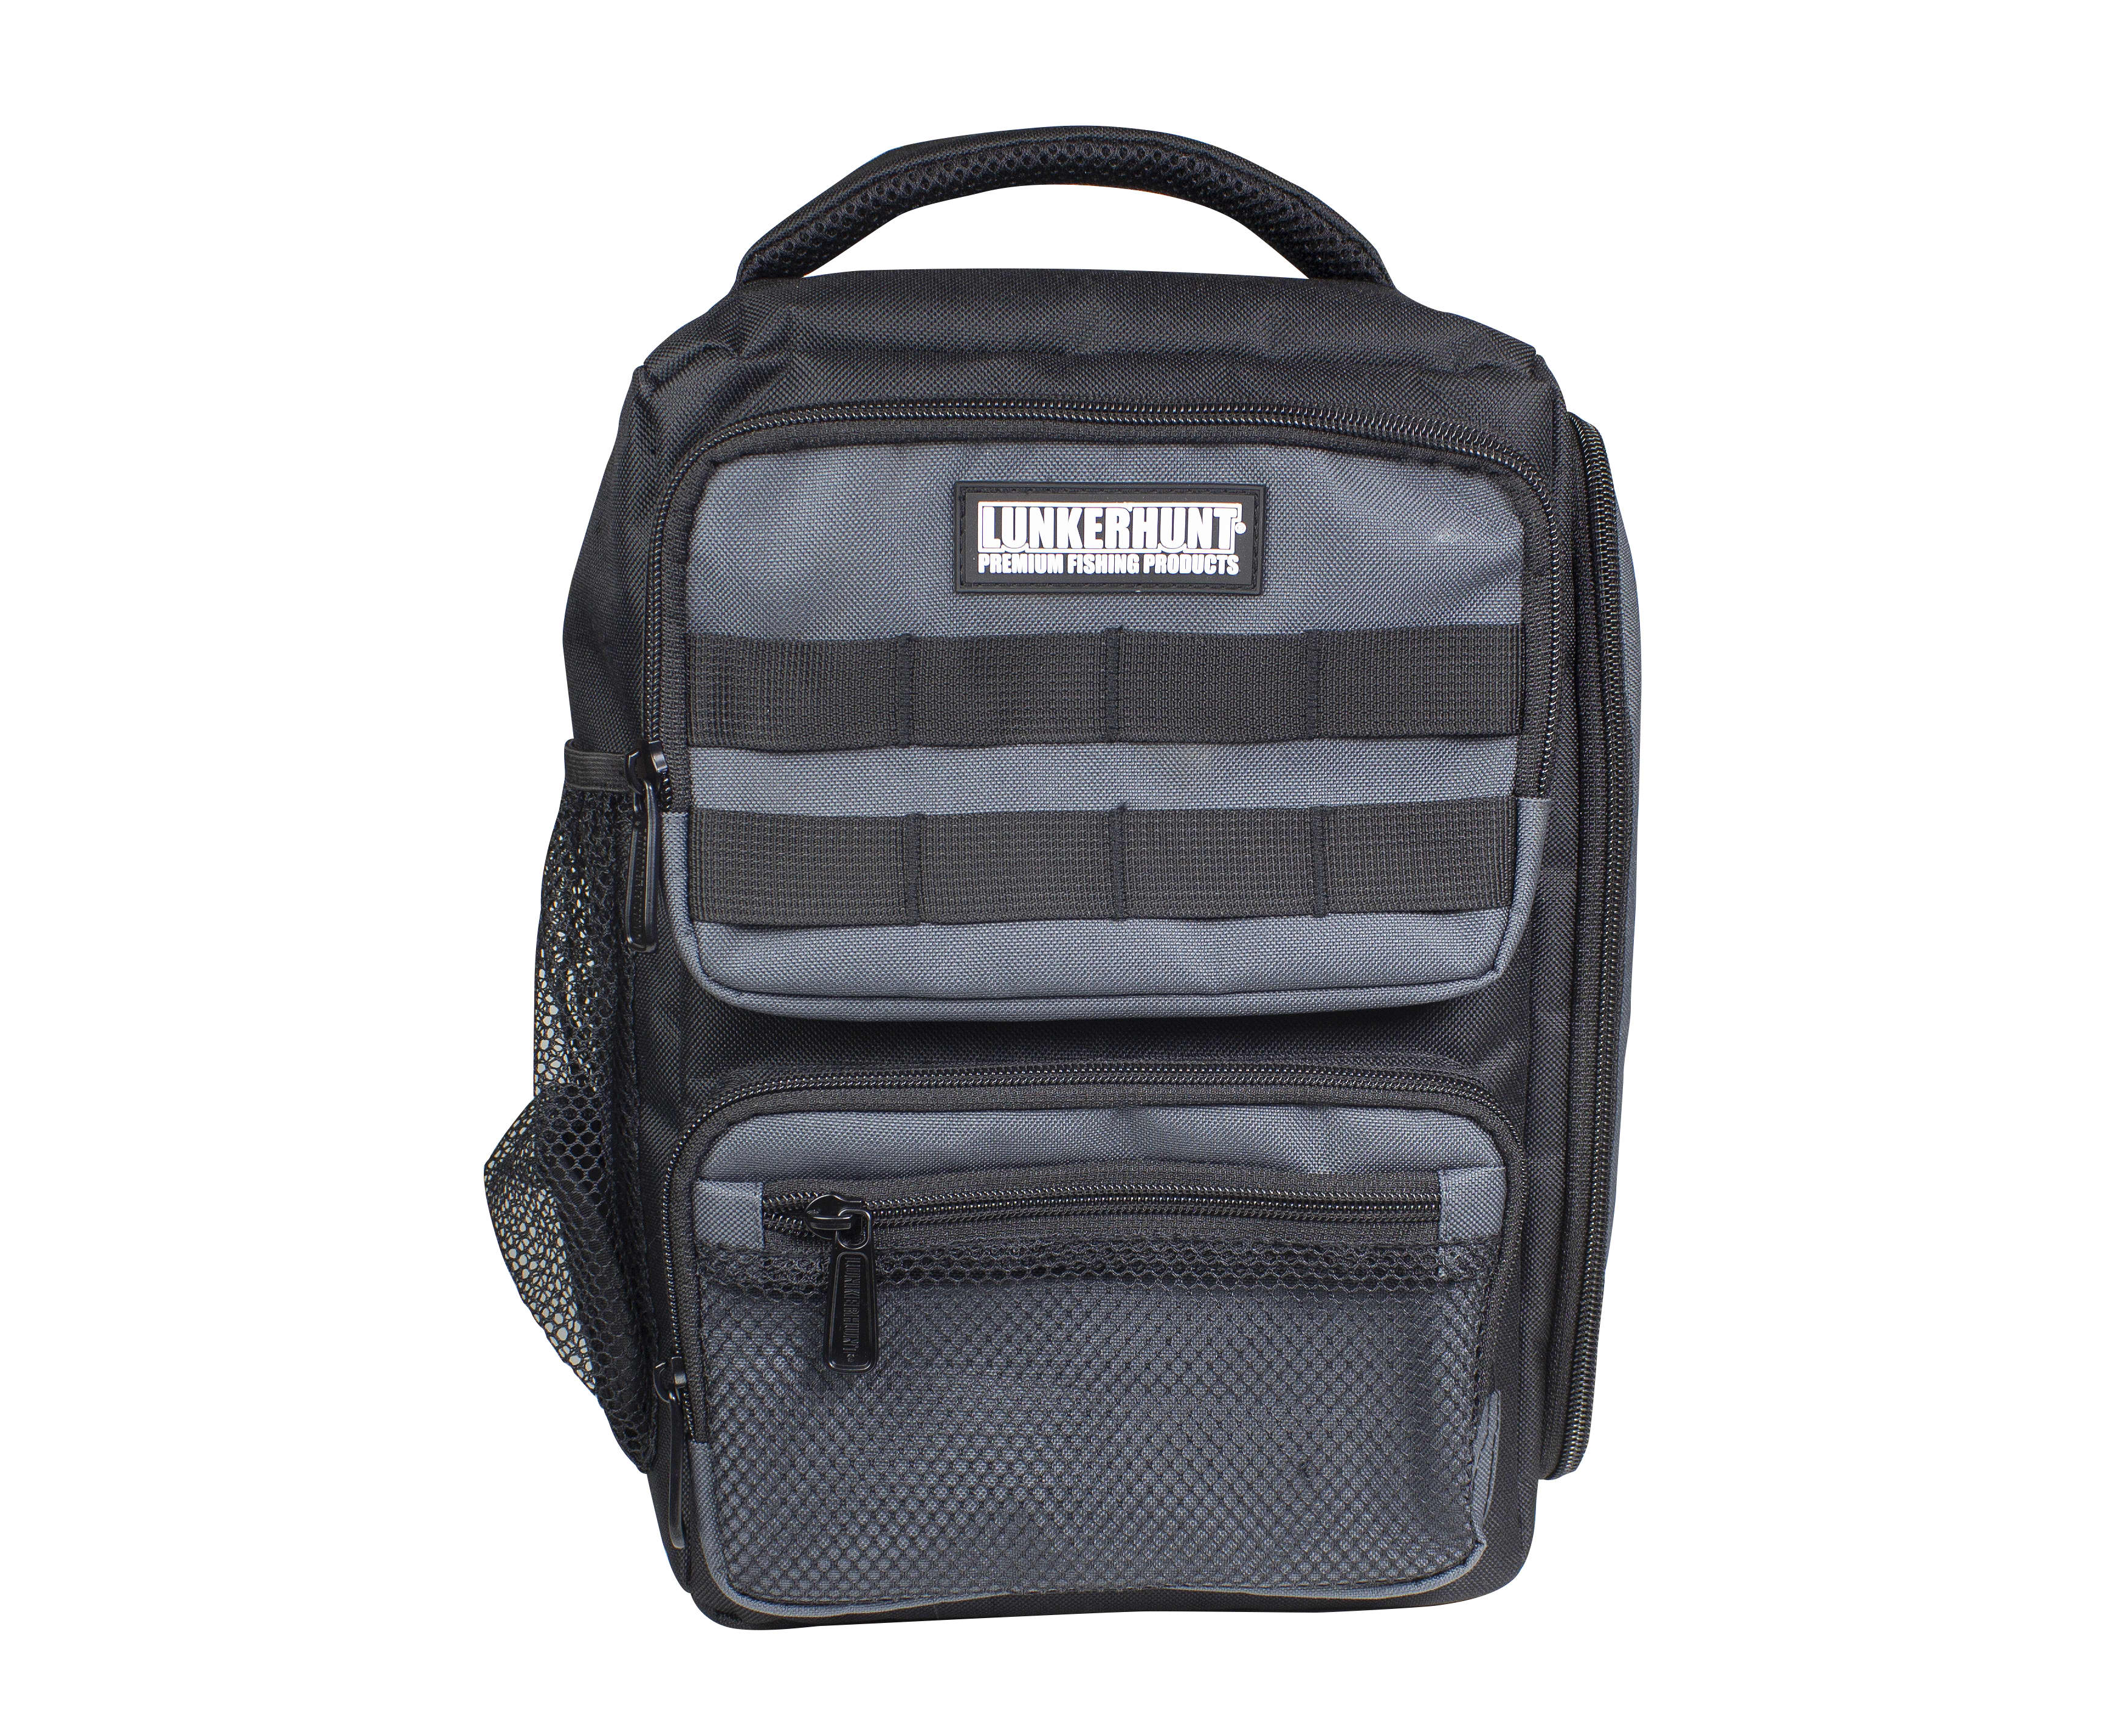 Bass Pro Shops® Extreme Series Wide-Top Tackle Bag